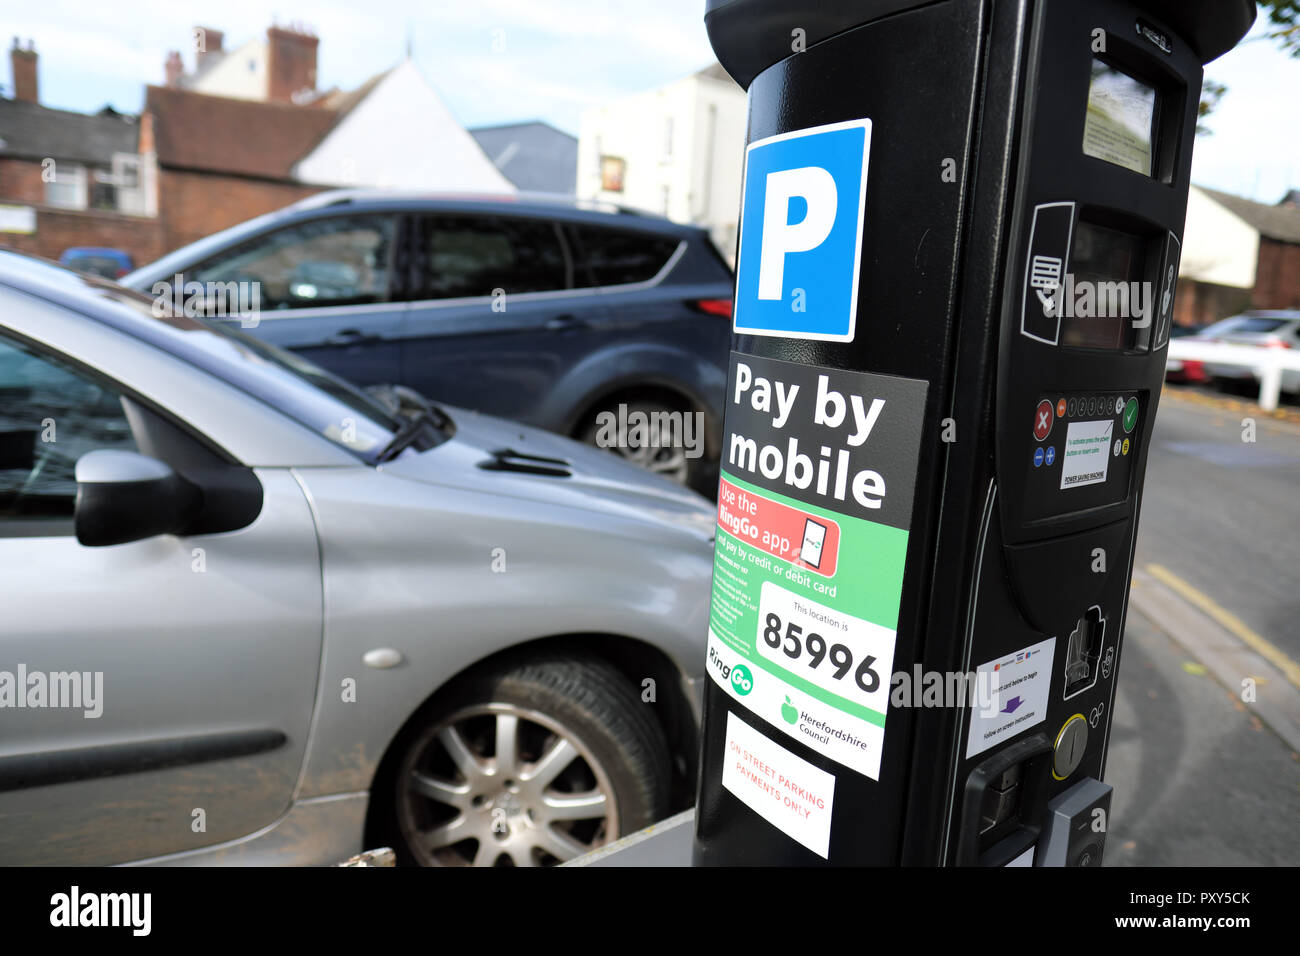 Car Parking machine with Pay By Mobile phone option in Hereford UK Stock Photo